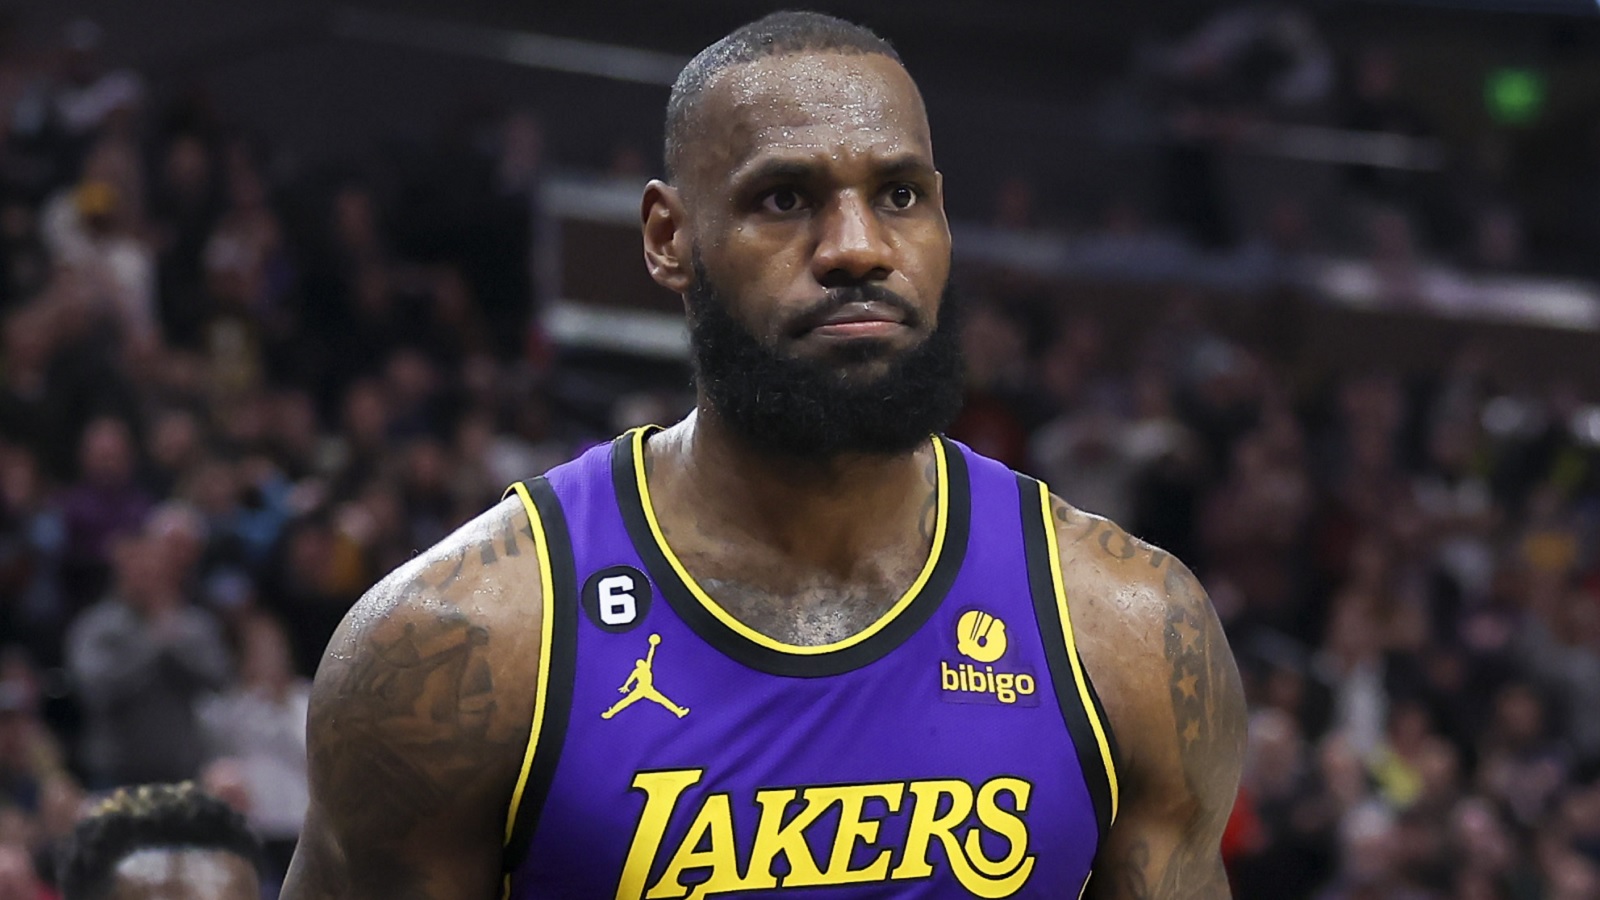 LeBron James had concerning comment after Lakers' loss to Celtics